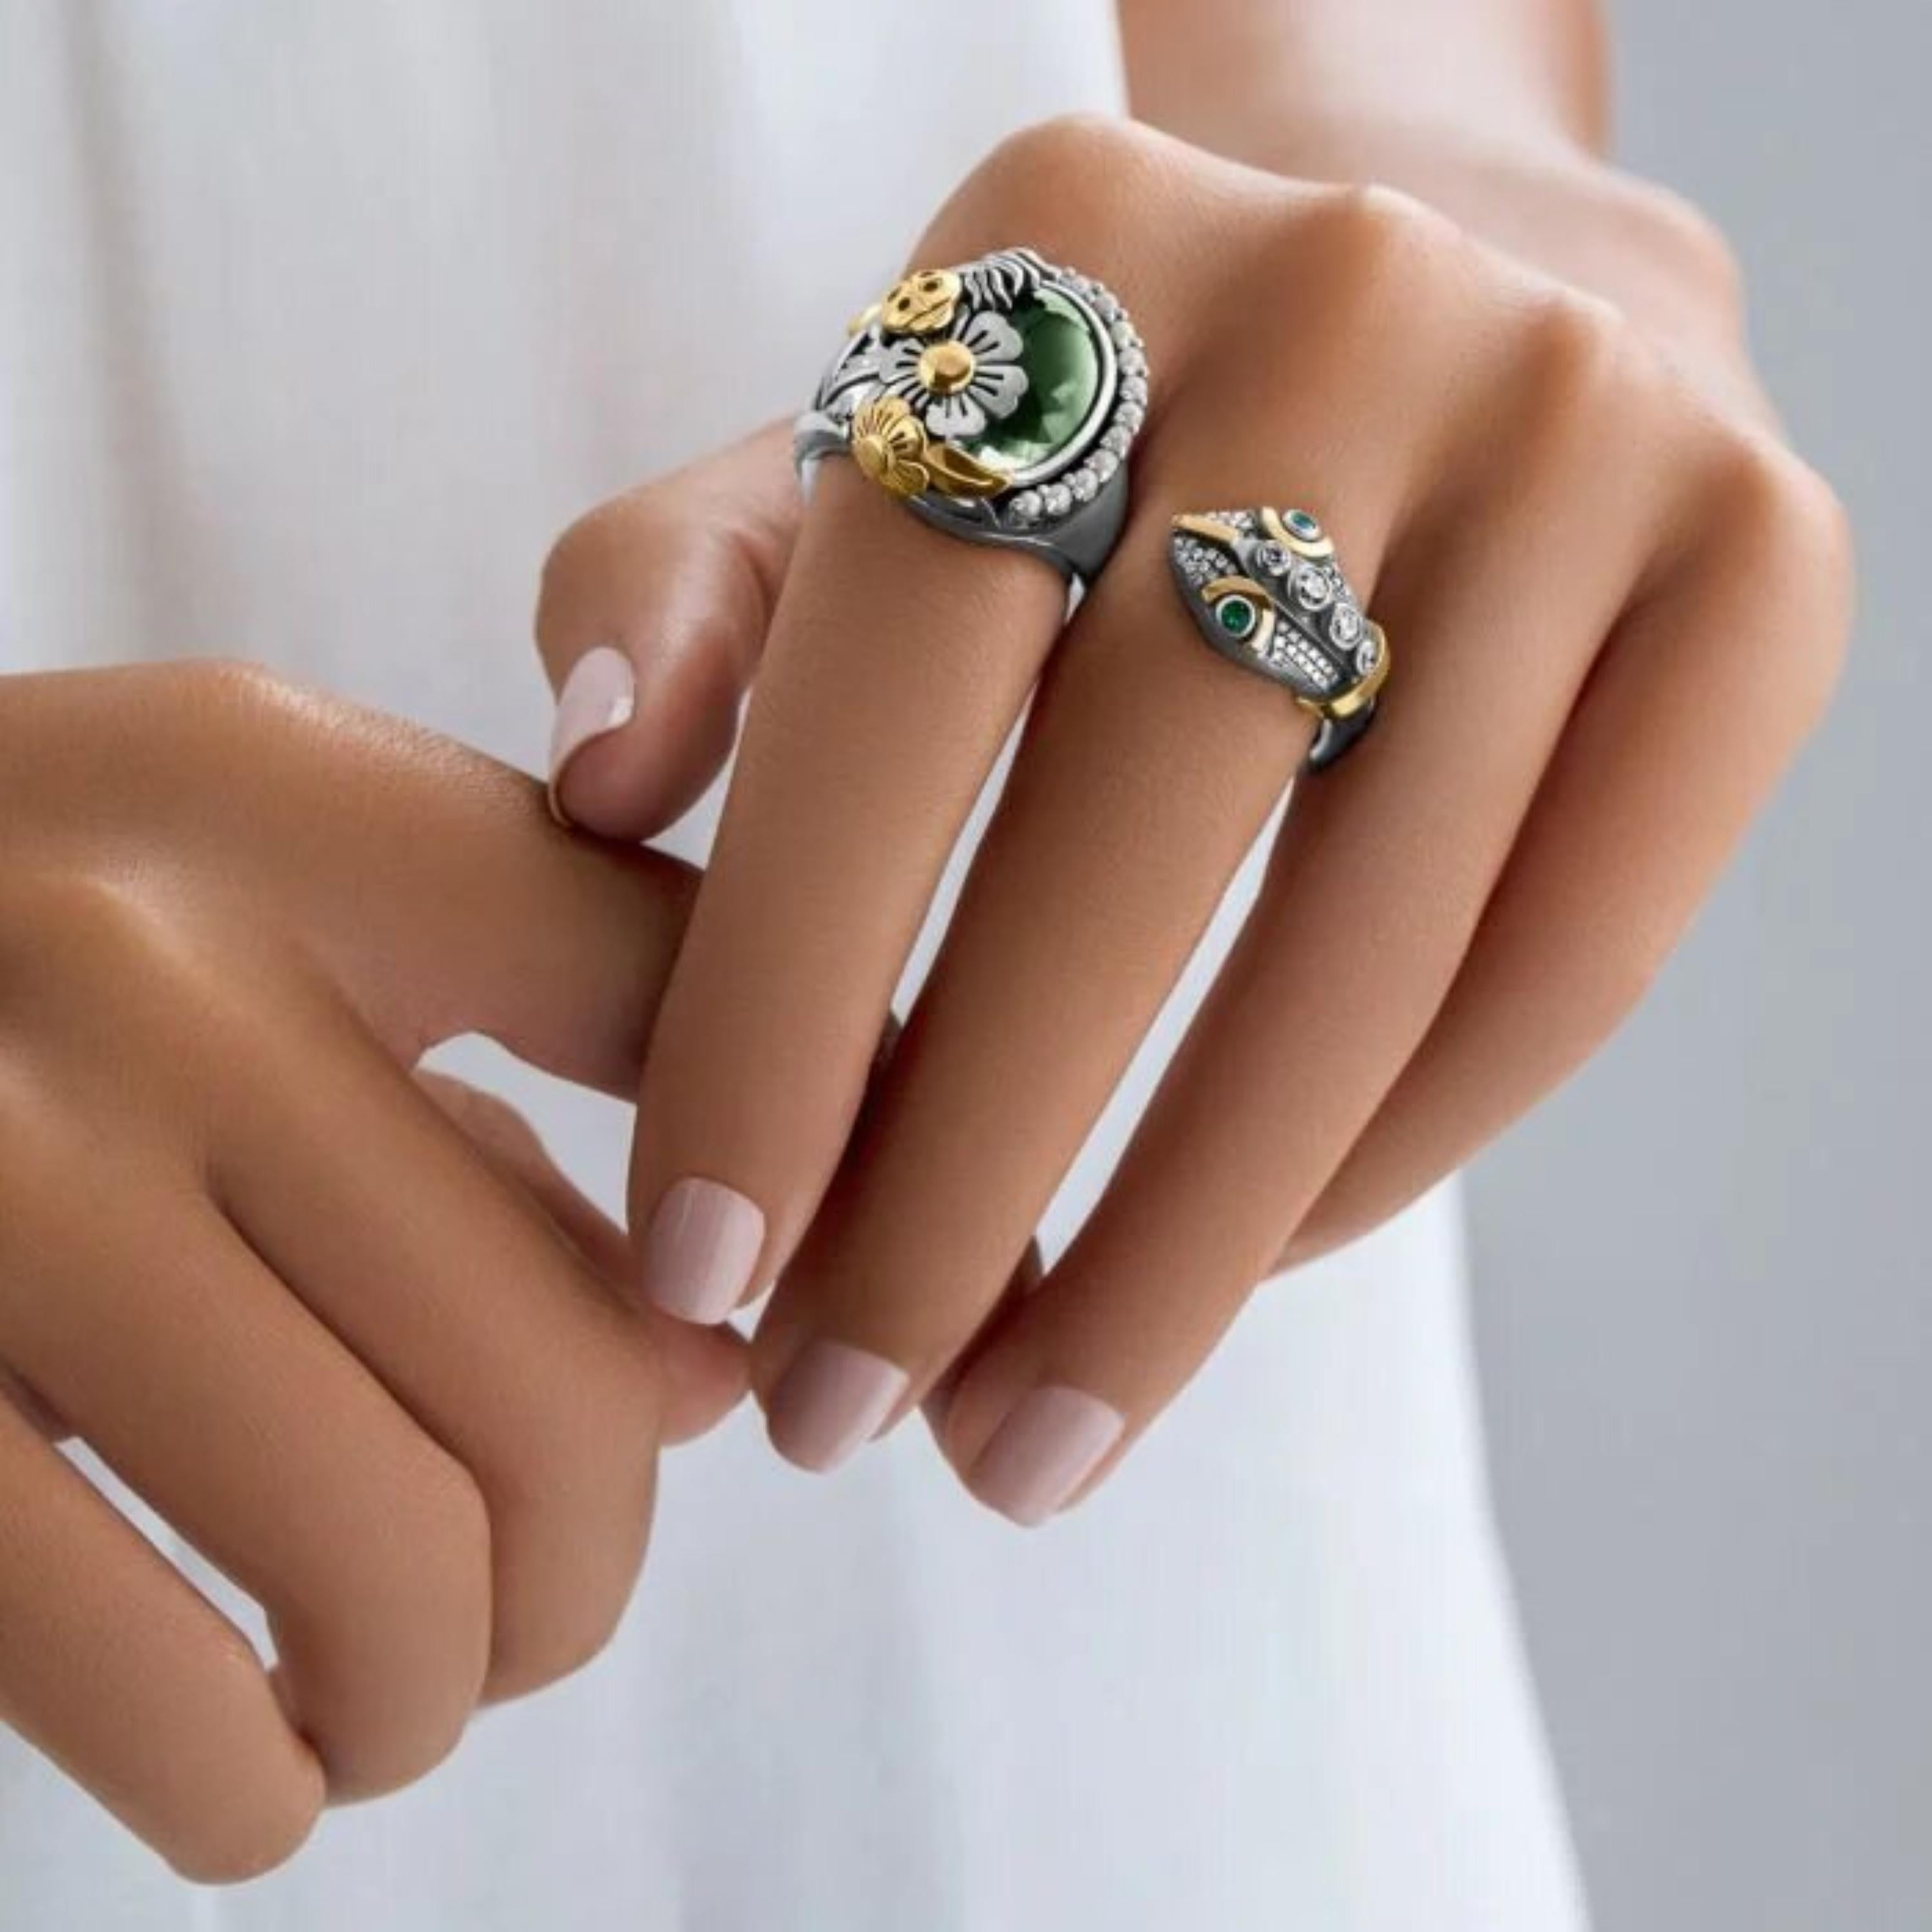 18 Karat Gold, Sterling Silver, Green Amethyst, Pearl, Diamond and Emerald Statement Snake Double Finger Ring.

18 Karat Gold and Sterling Silver Double Finger adorned with a Victorian-influenced Snake and Floral motifs, set with a 10.00 carat